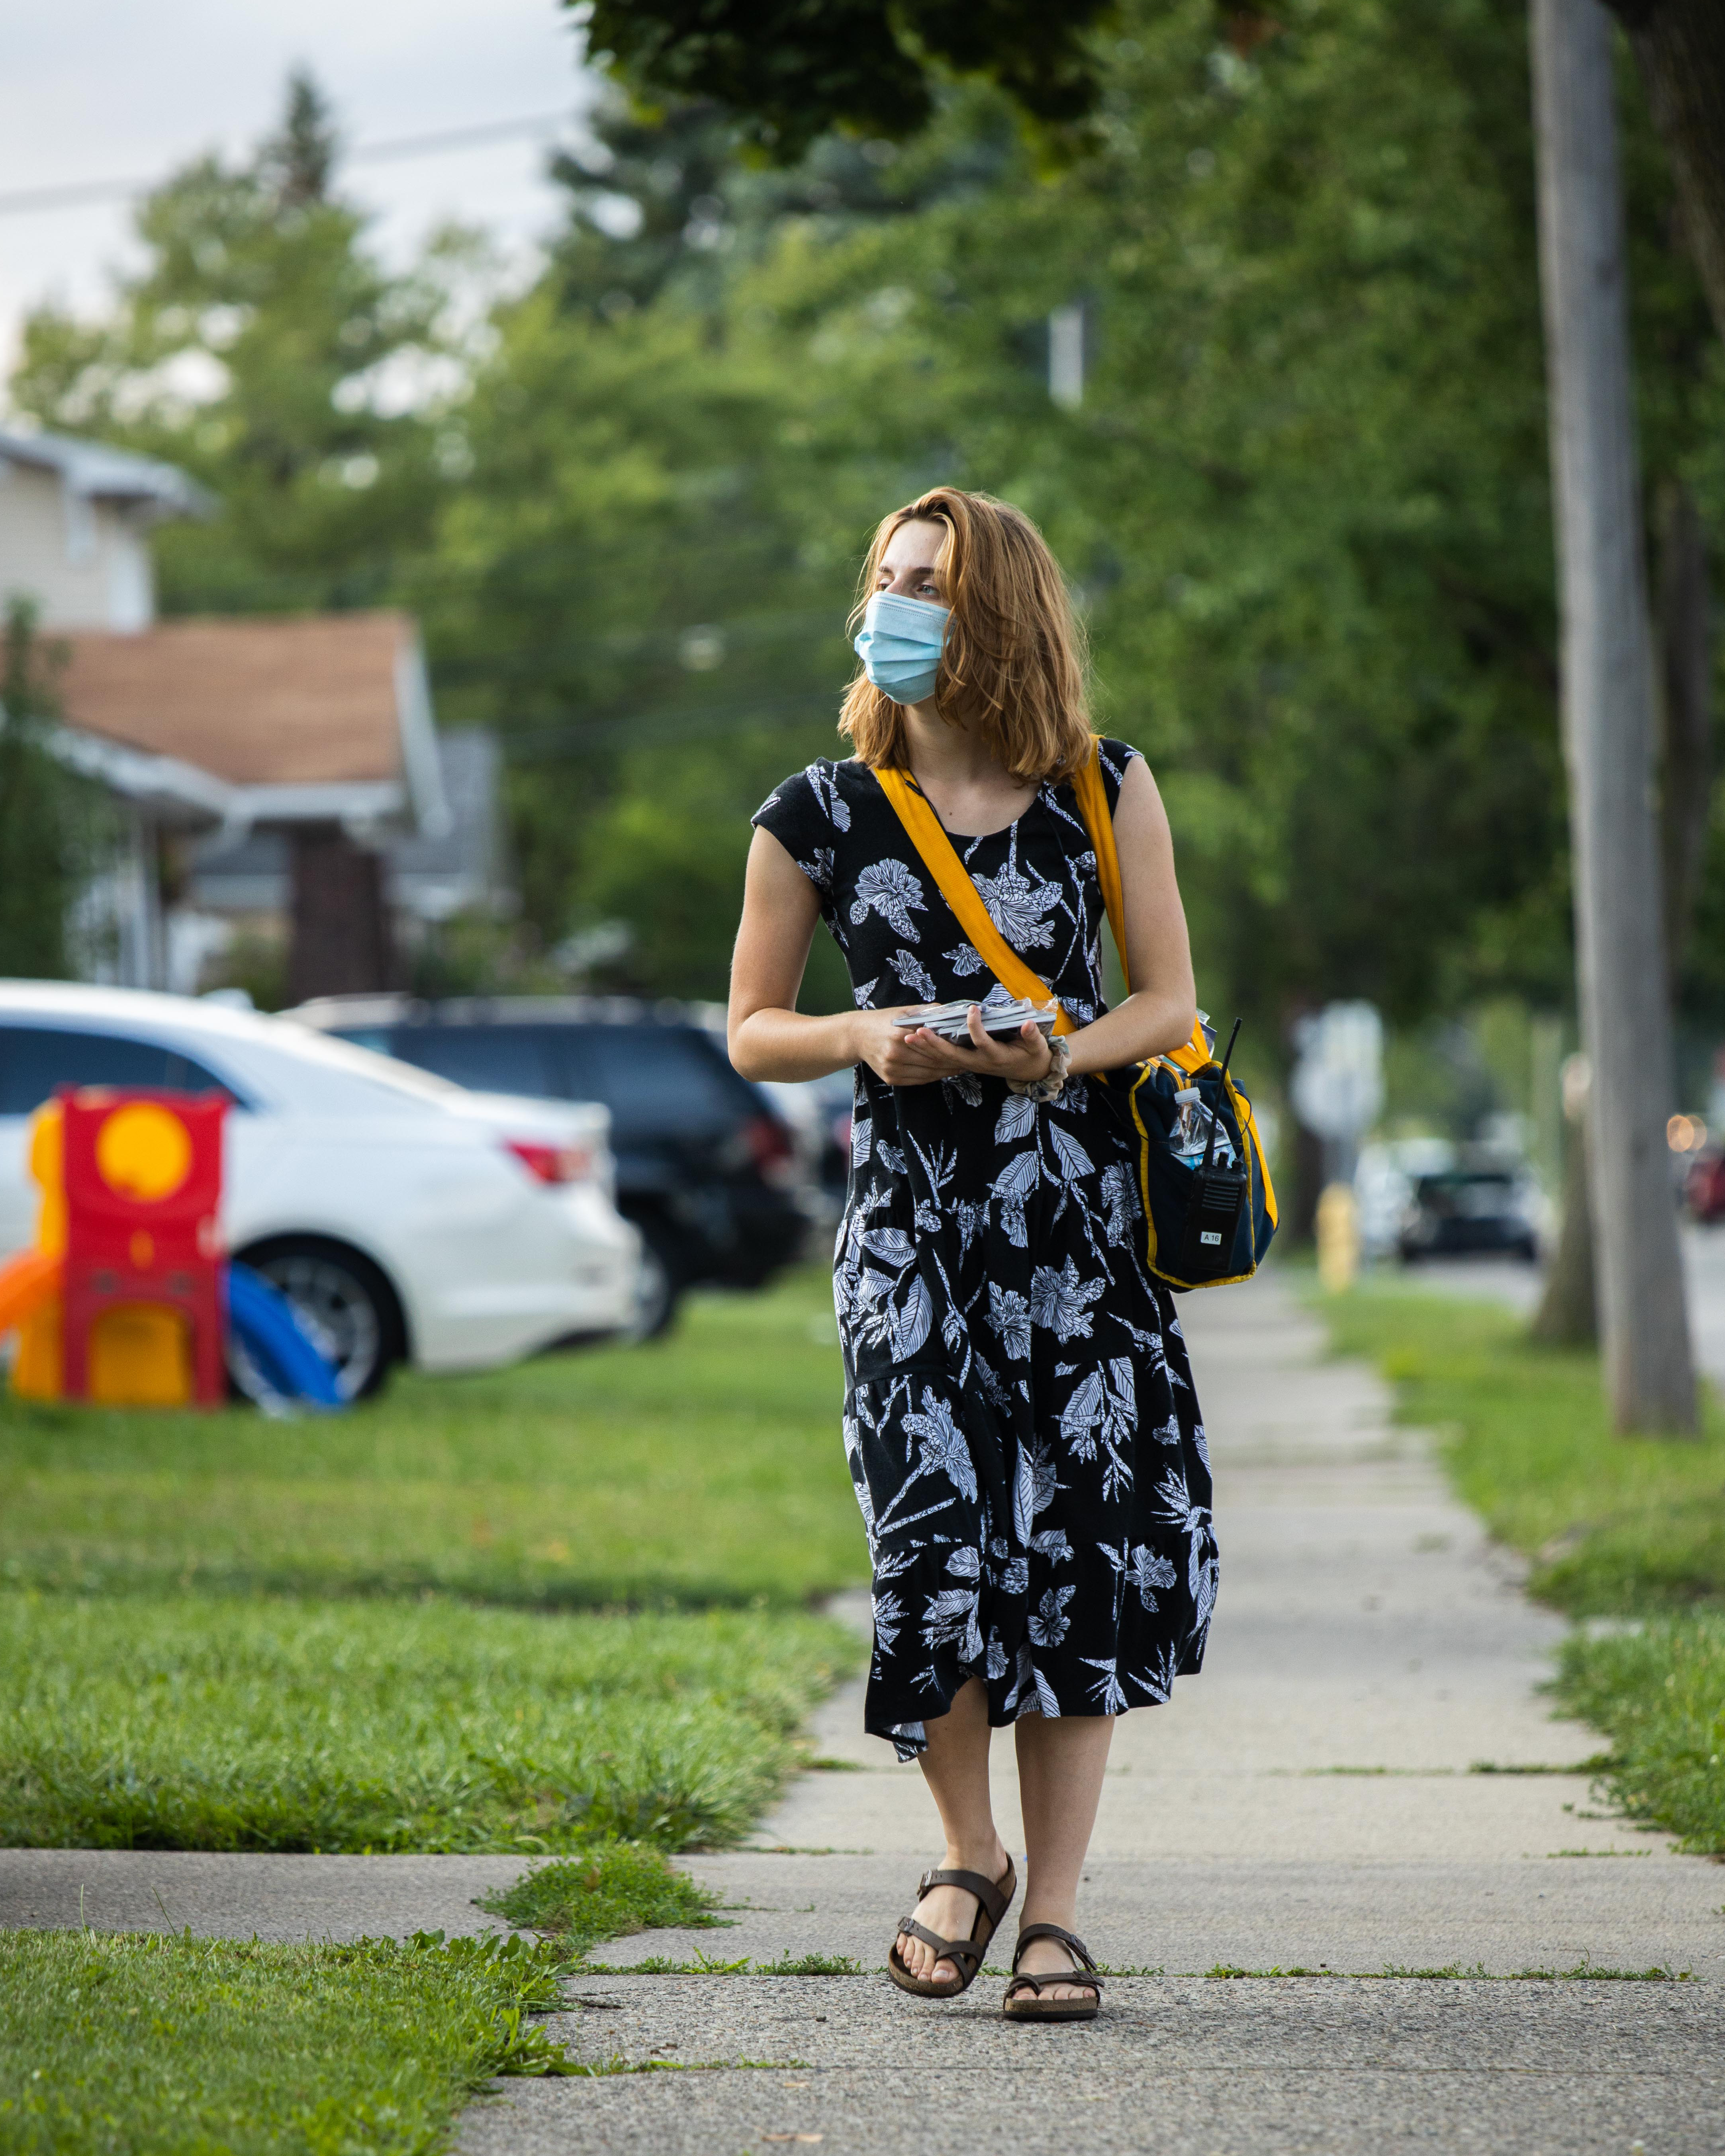 Michigan Youth Rush member canvasses in a neighborhood in Dearborn, Michigan – home to the largest population of Arab Americans in the United States. 